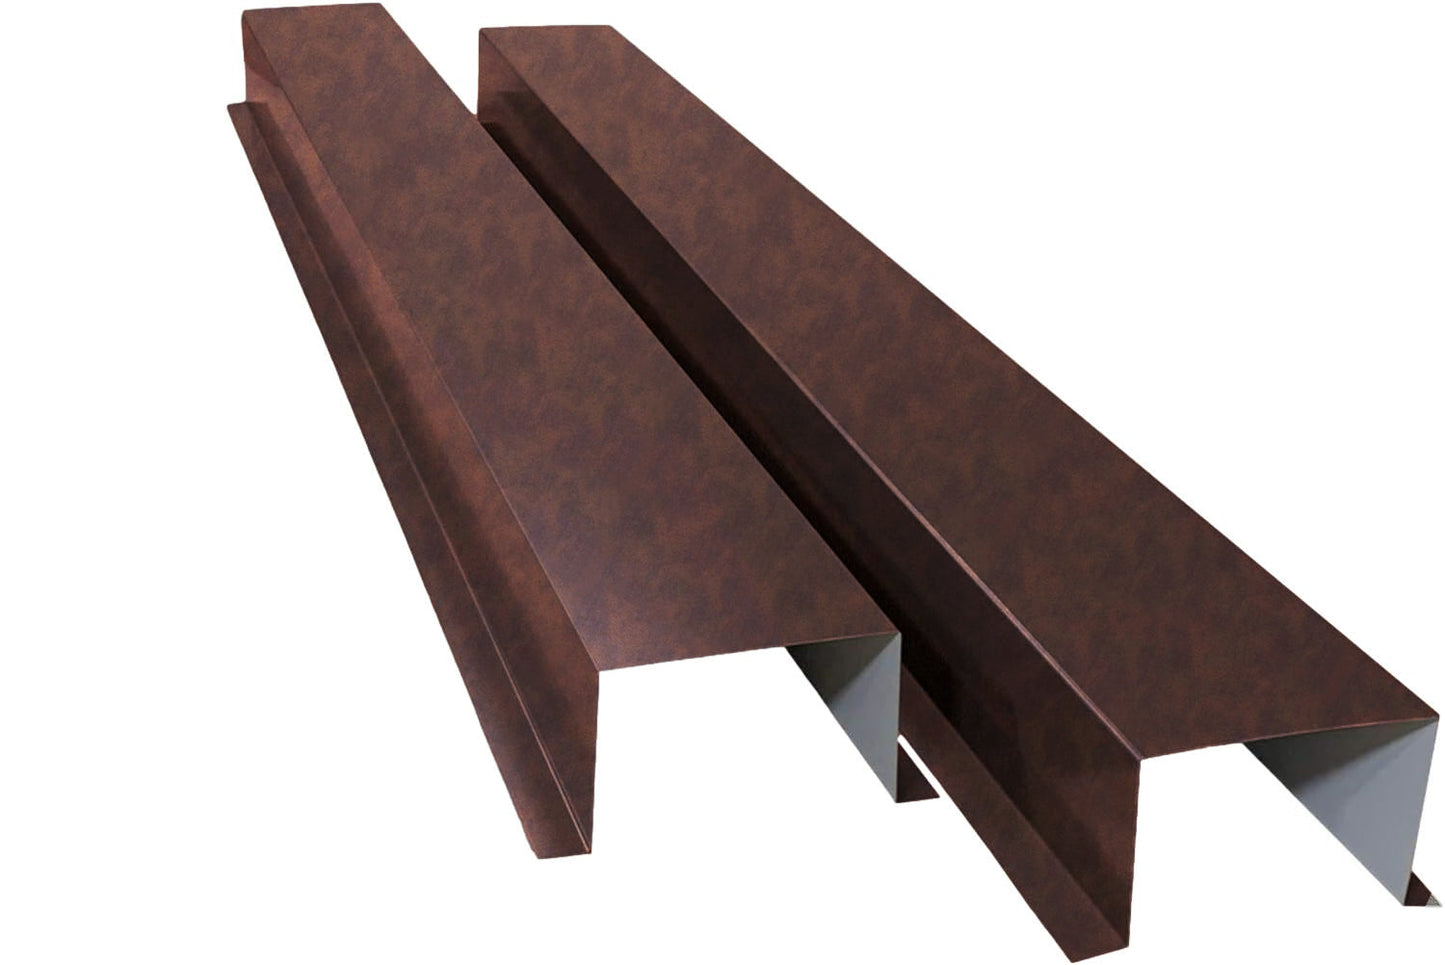 Two pieces of brown, rust-colored Perma Cover Commercial Series - 24 Gauge Painted Metal HVAC Line Set Covers - Heavy Duty, Multiple Sizes & Colors are shown against a white background. The covers have a folded, angular design and seem made for installation on roof edges or other architectural features.